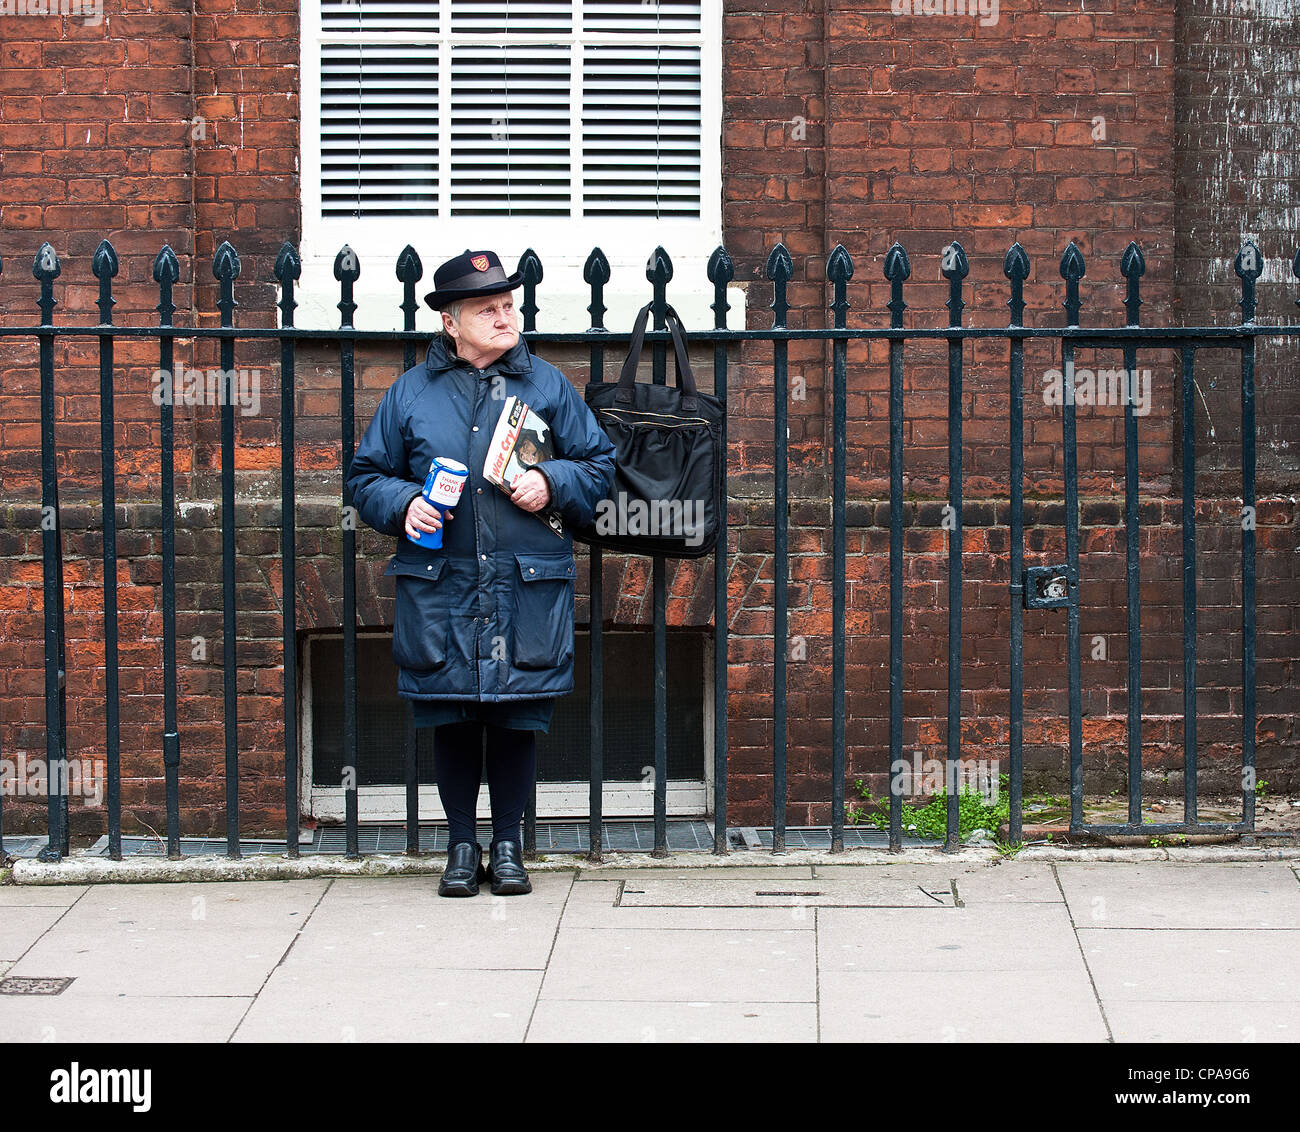 A woman collecting for the Salvation Army Stock Photo